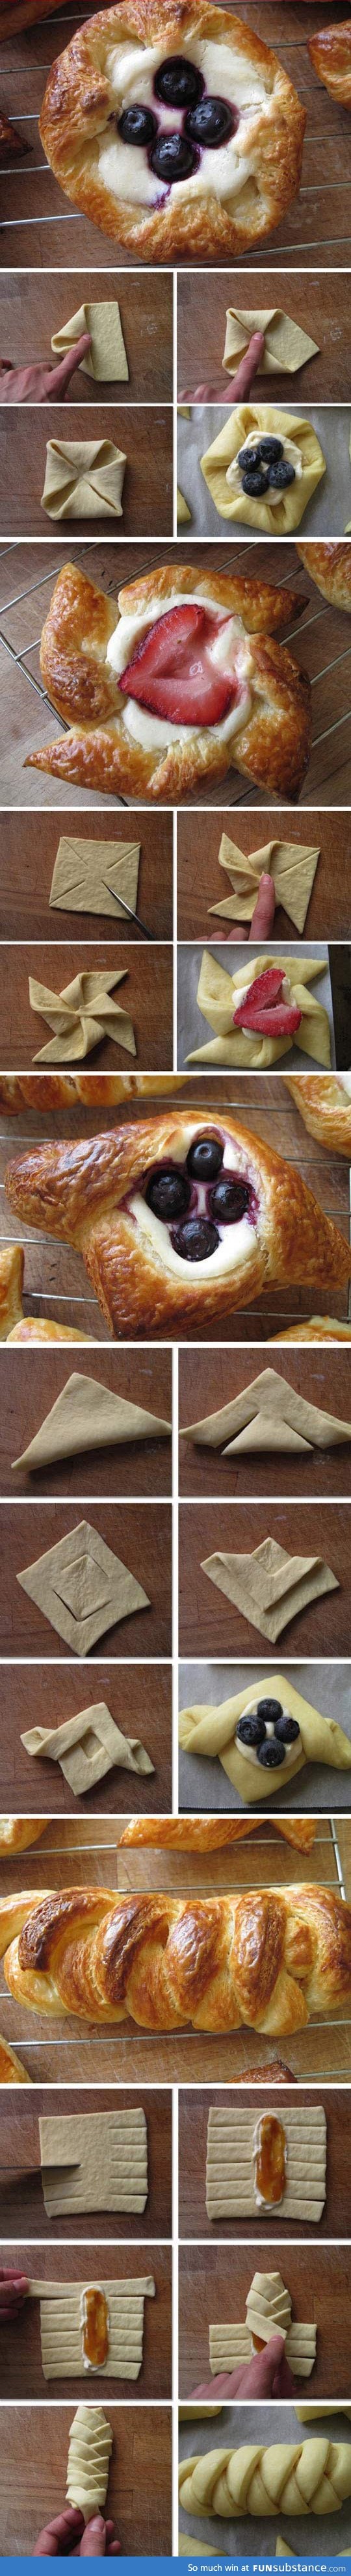 Here's How To Do Pastry Right